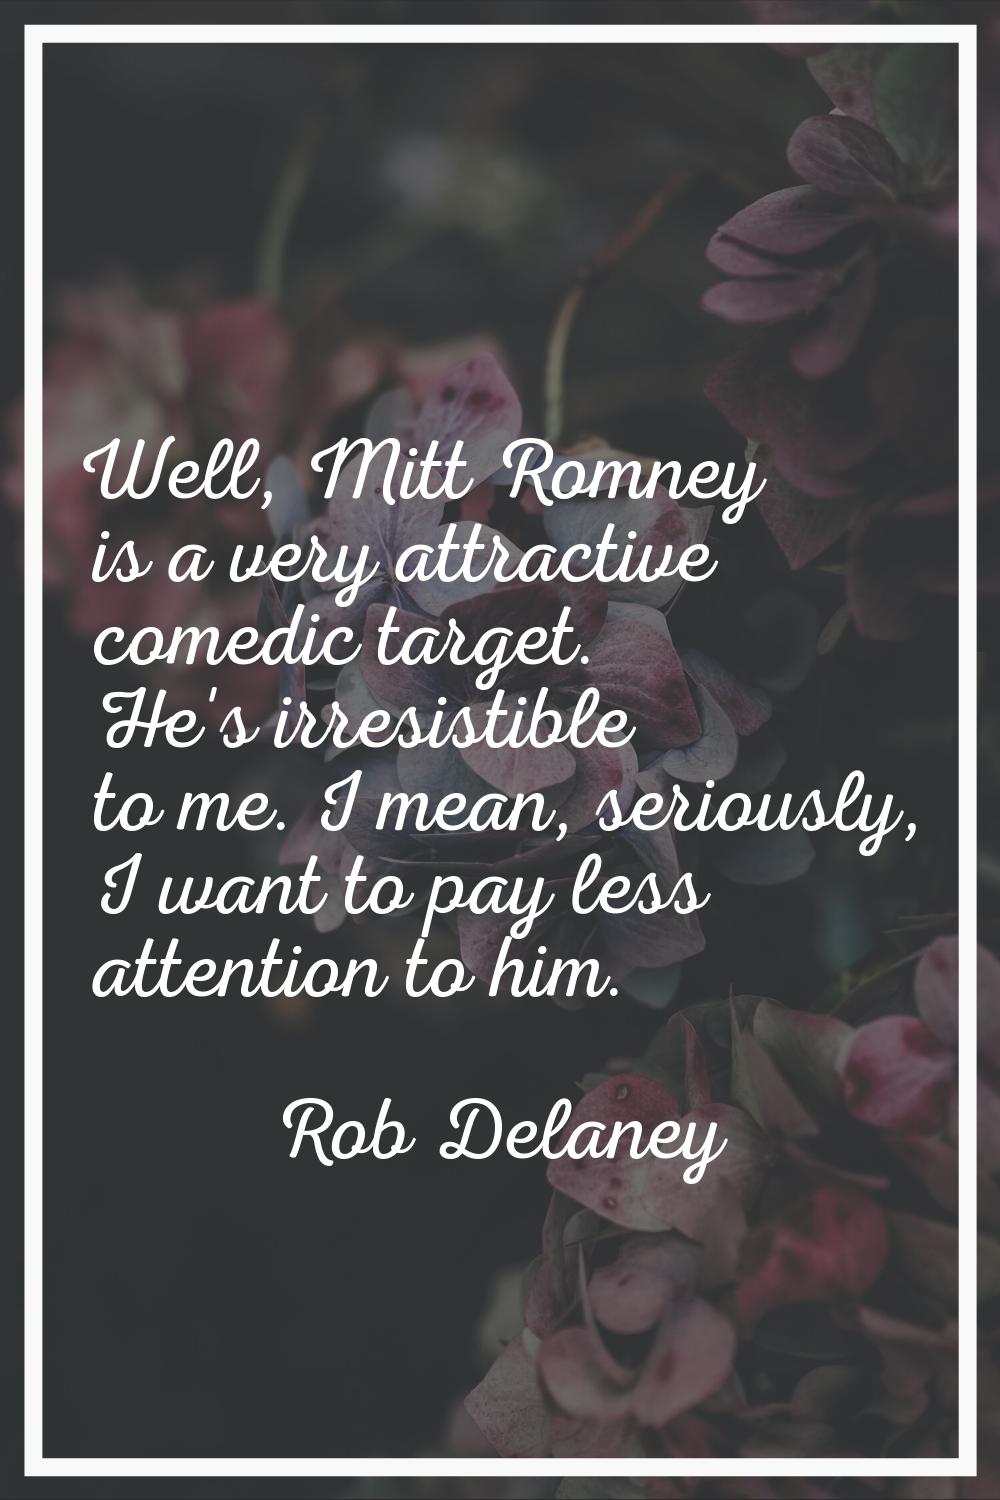 Well, Mitt Romney is a very attractive comedic target. He's irresistible to me. I mean, seriously, 